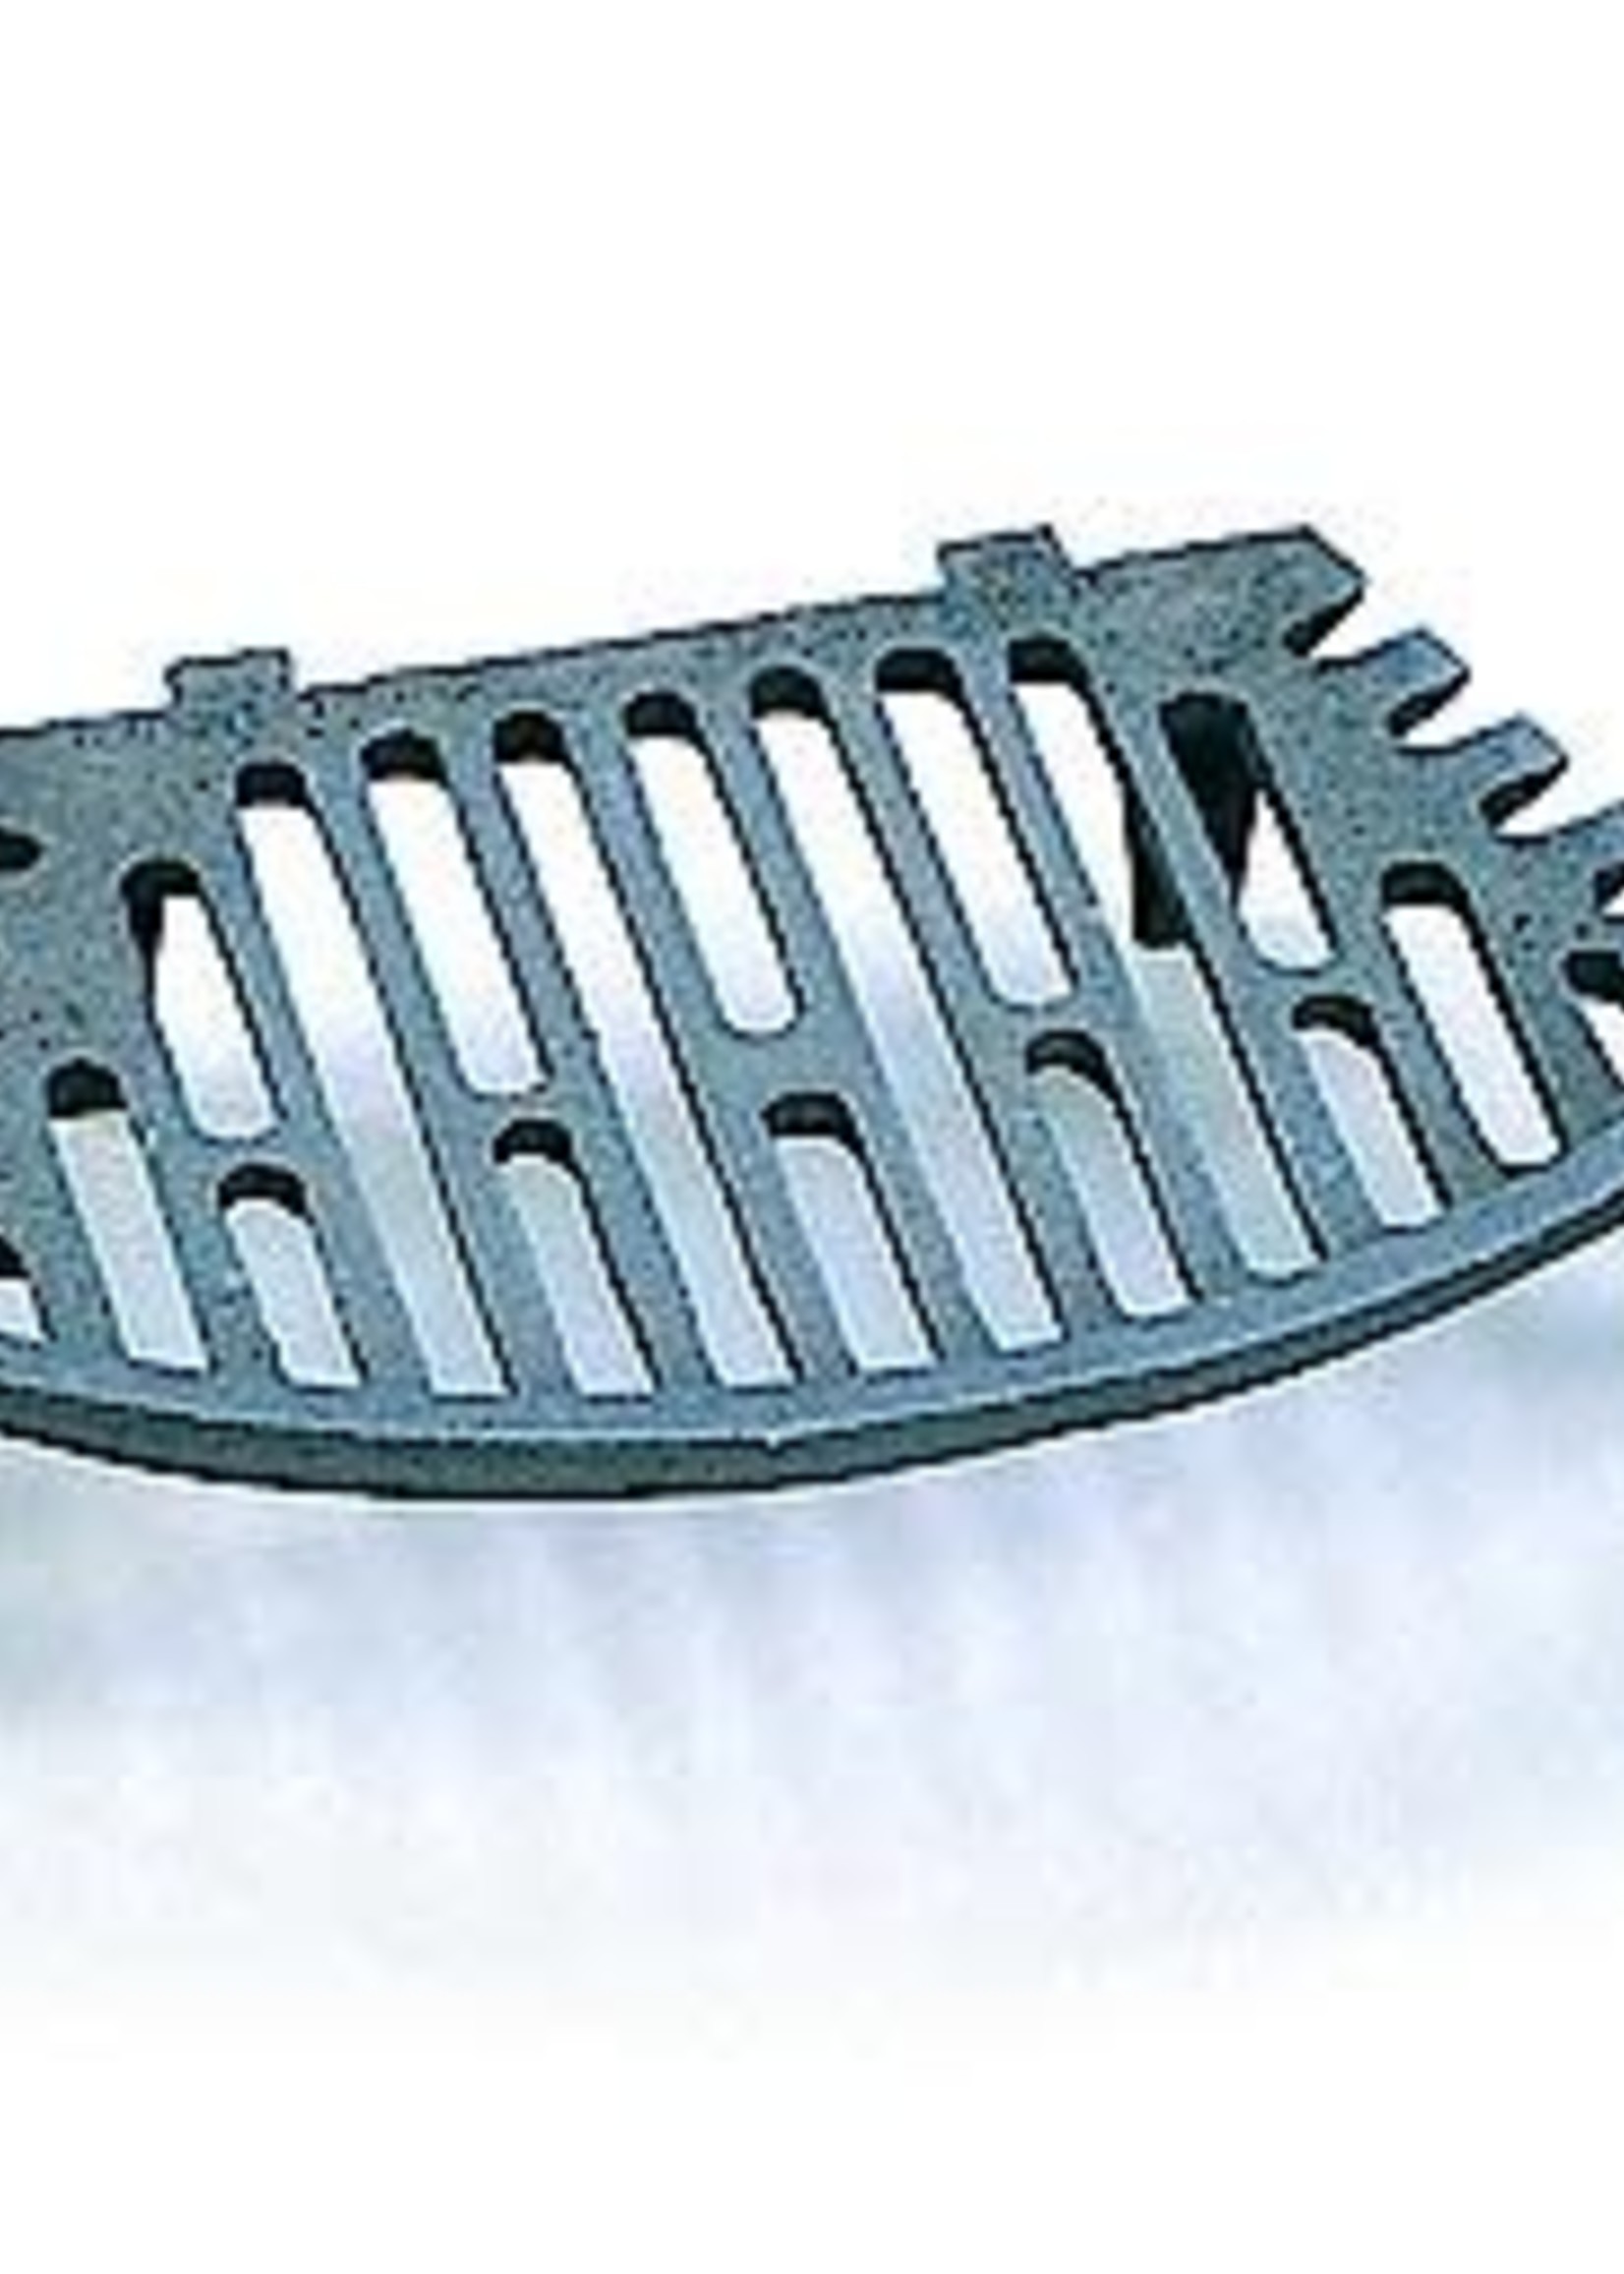 Manor Reproductions Ltd Curved Grate 18"